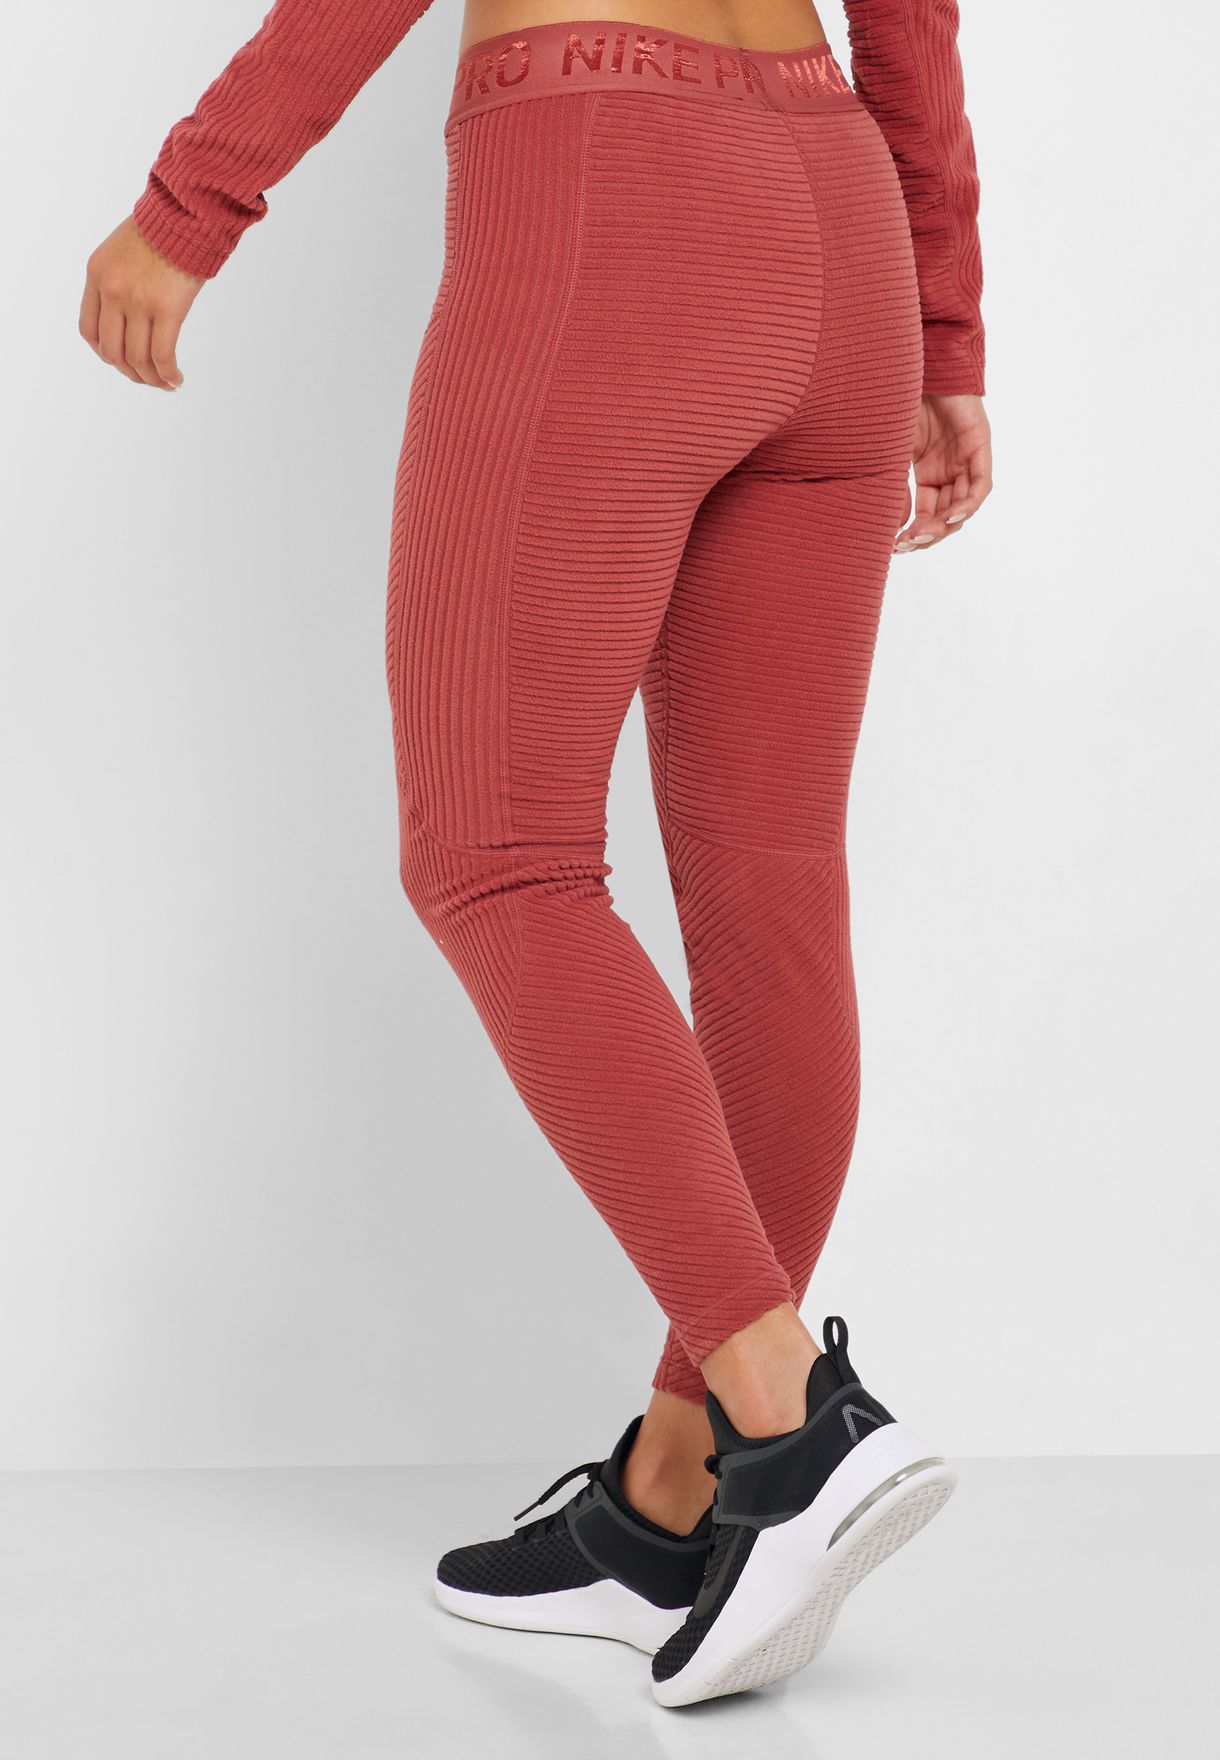 Buy Nike red Pro Velour Tights for Kids 